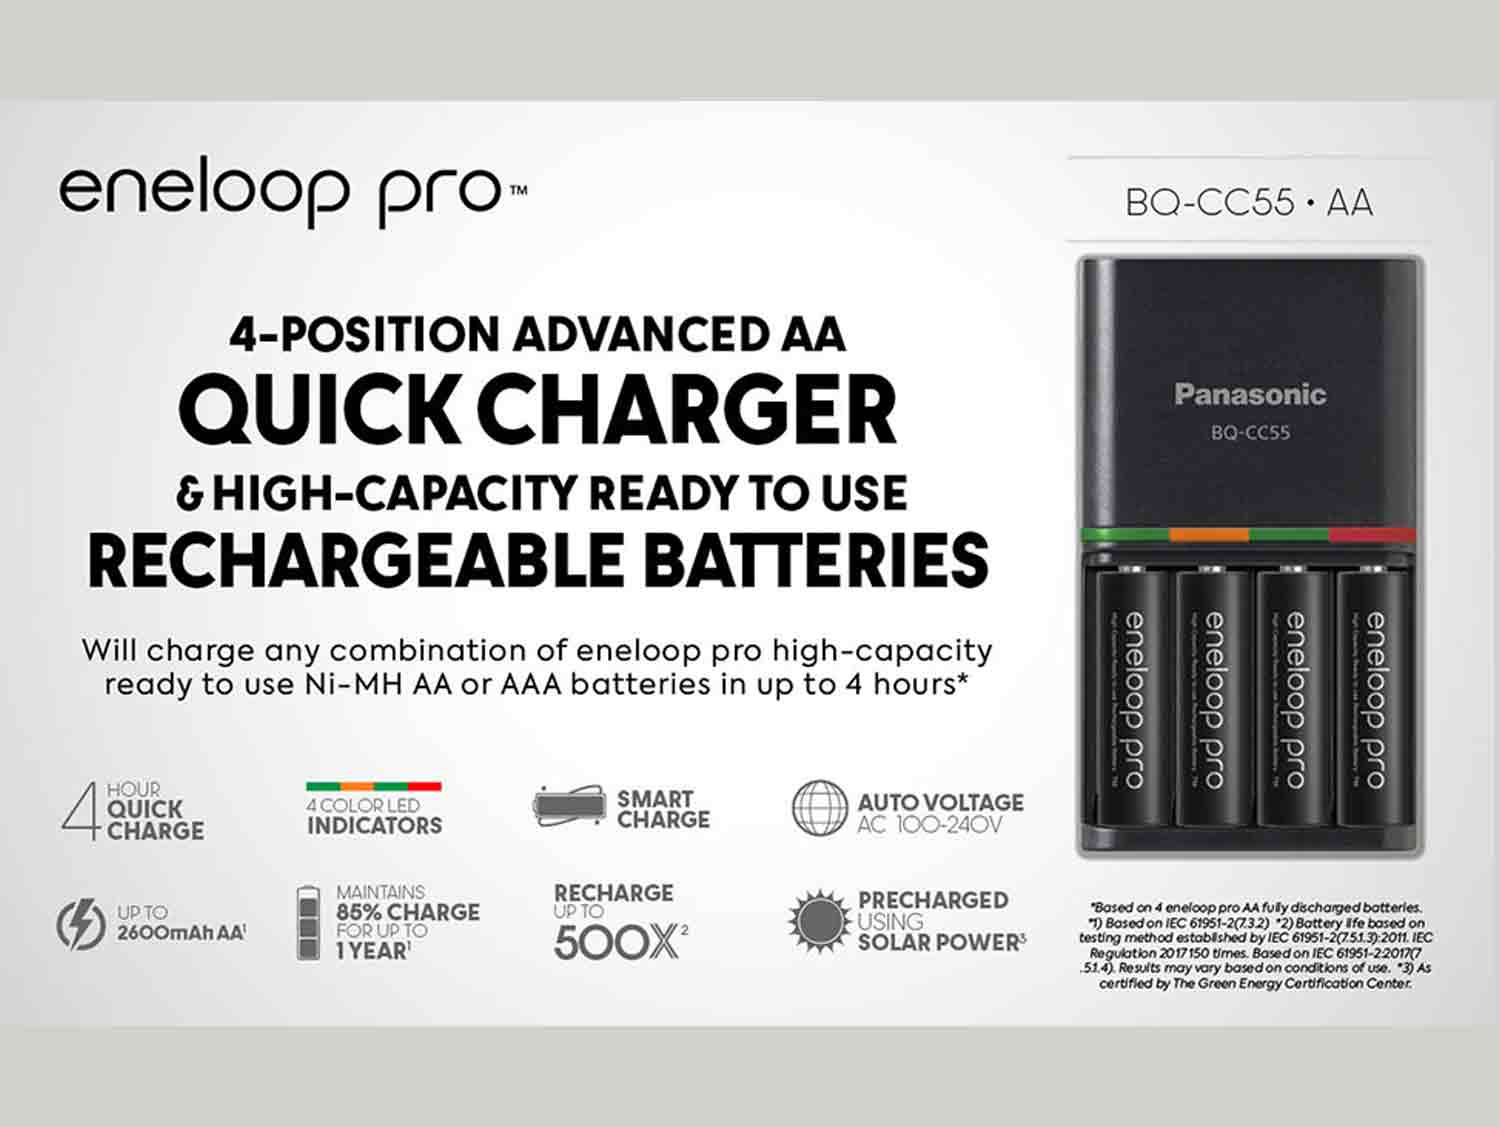 Panasonic Eneloop Pro Charger with 4 Rechargeable Batteries BQ-CC55